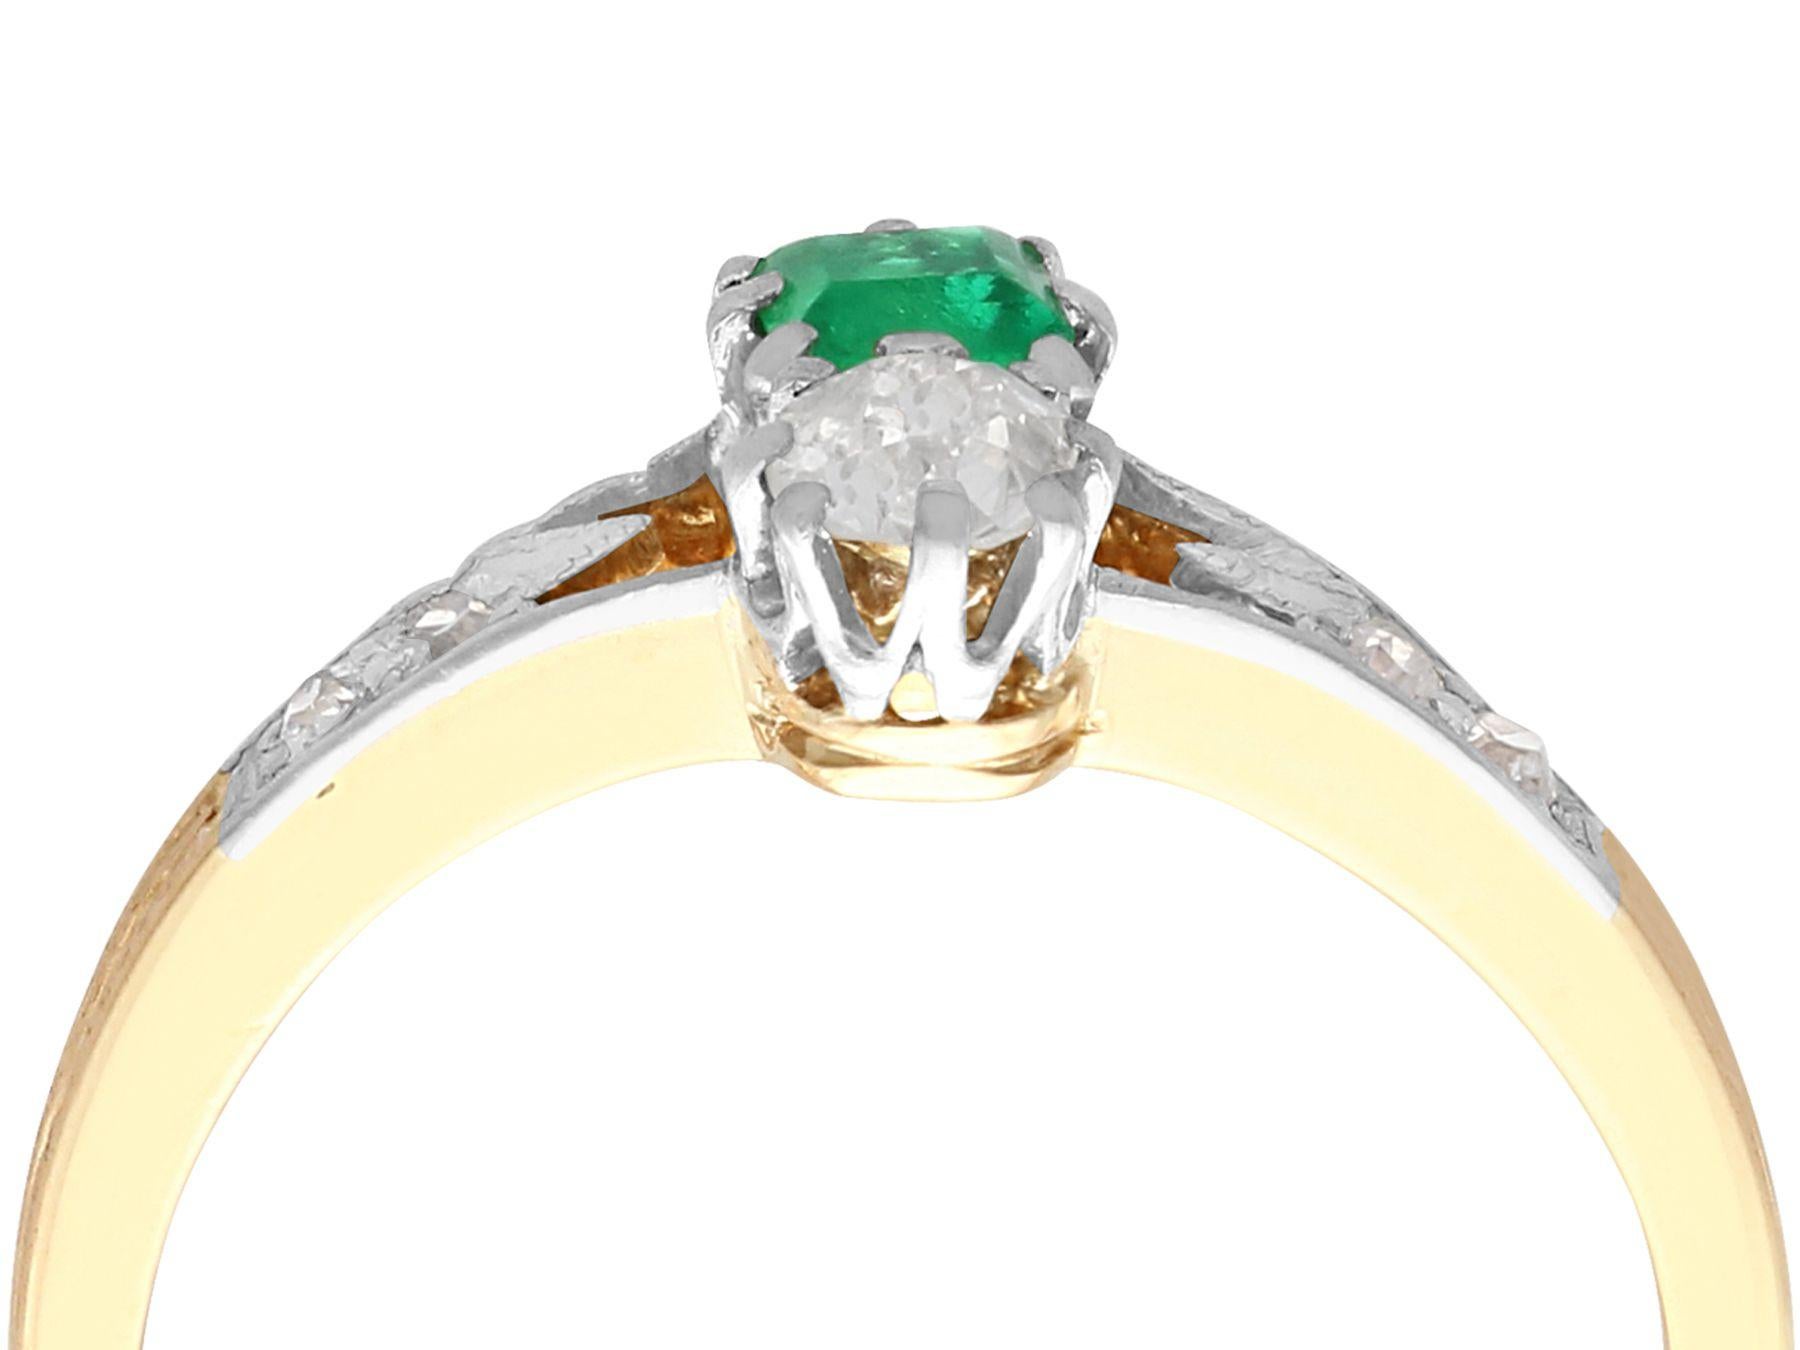 A fine and impressive antique German 0.24 carat natural emerald and 0.23 carat diamond, 14k yellow gold and 14k white gold set cocktail ring; part of our antique jewelry and estate jewelry collections

This fine and impressive antique emerald and